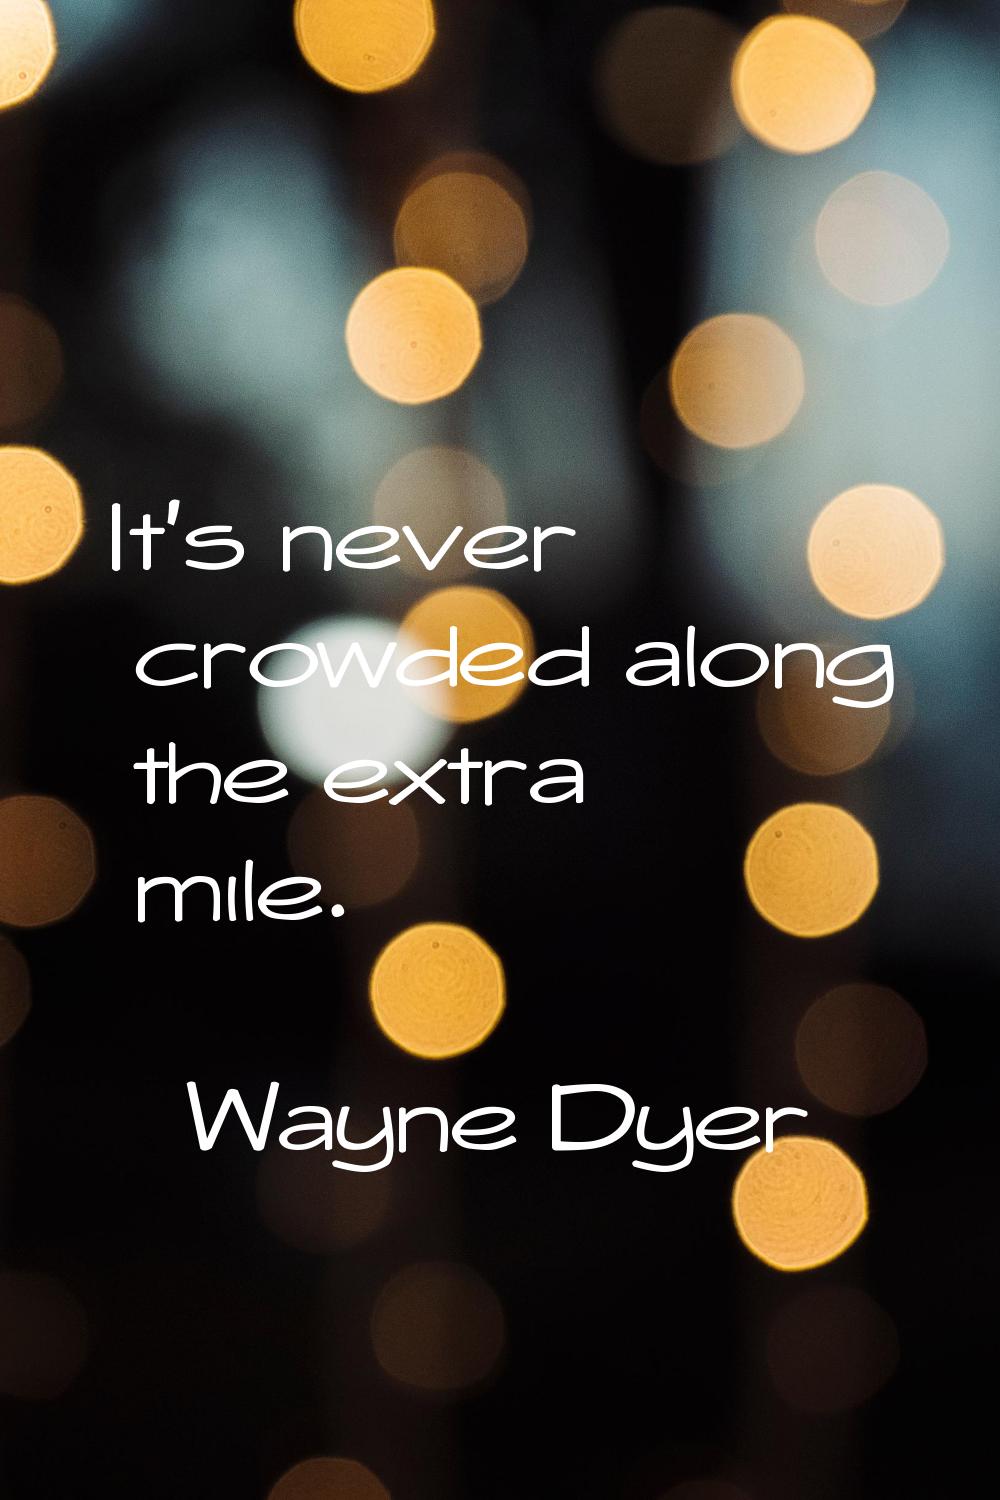 It's never crowded along the extra mile.